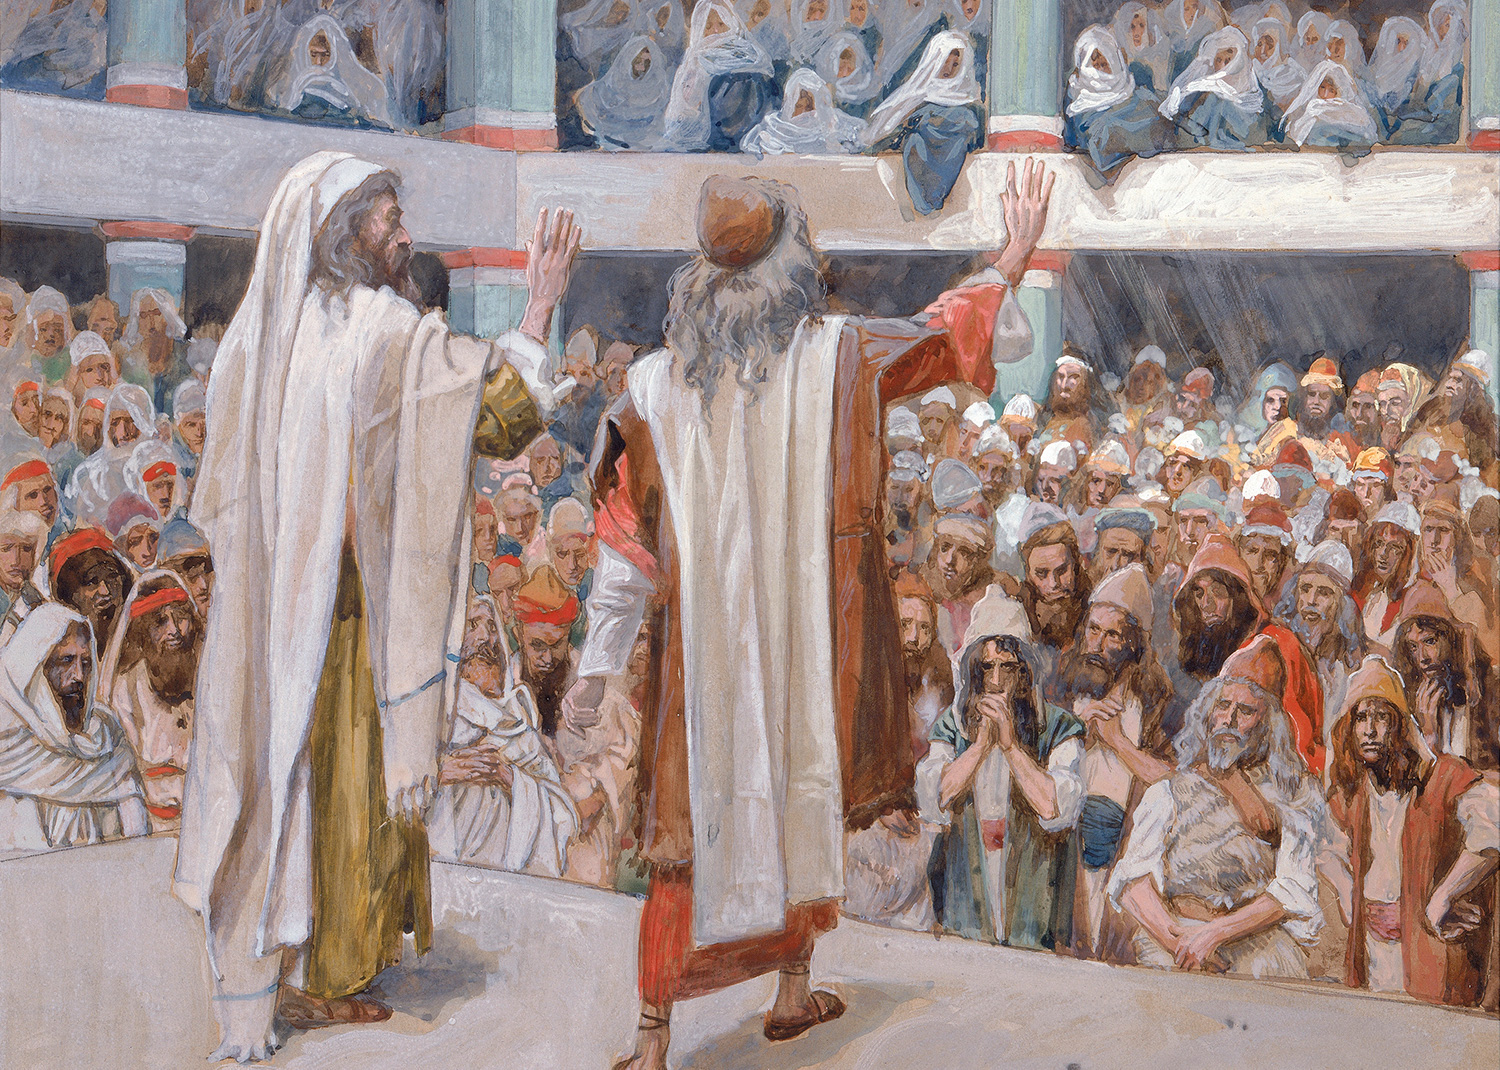 
From Moses and Aaron Speak to the People by James Jacques Joseph Tissot, c. 1896-1902. 

